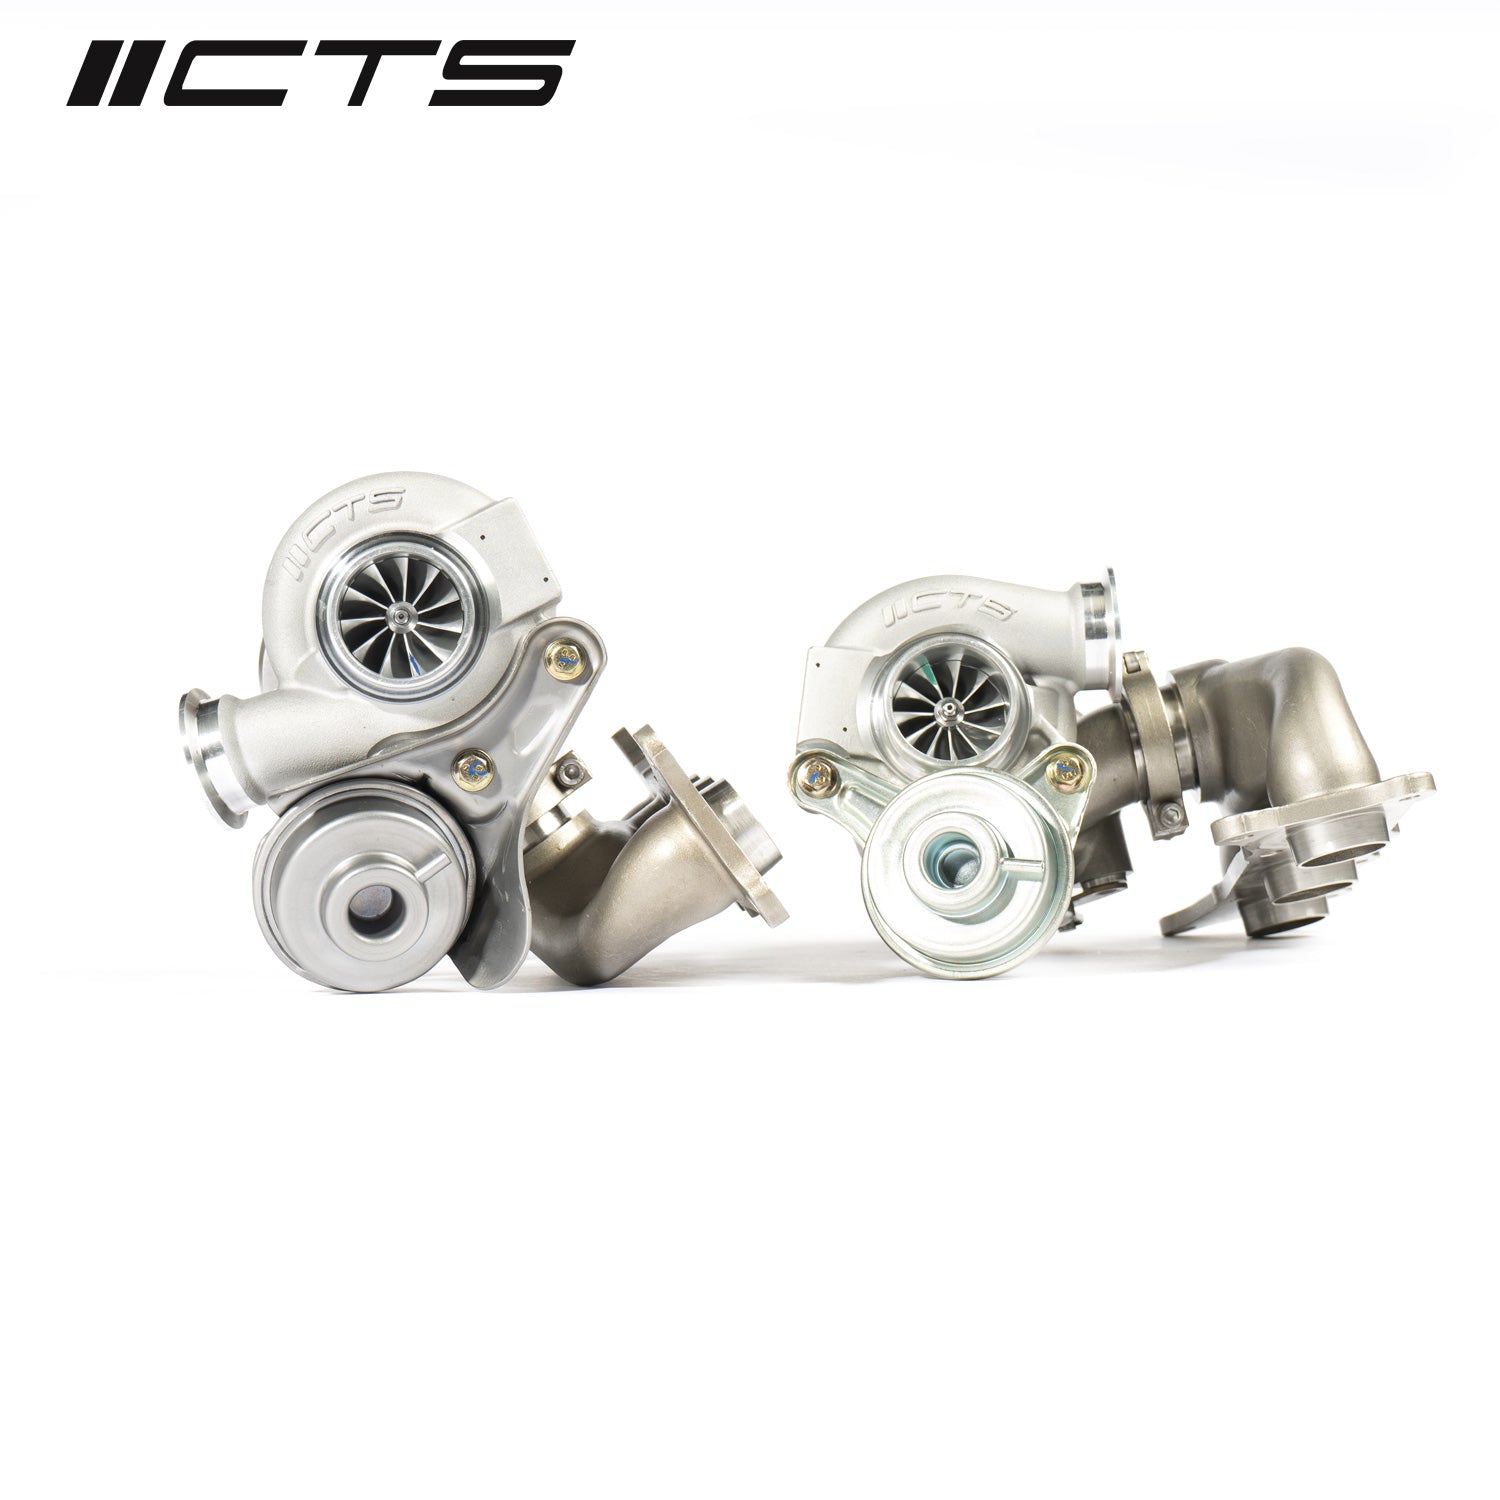 CTS Turbo BMW N54 335i/335xi/335is Stage 2+ "RS" Turbo Upgrade